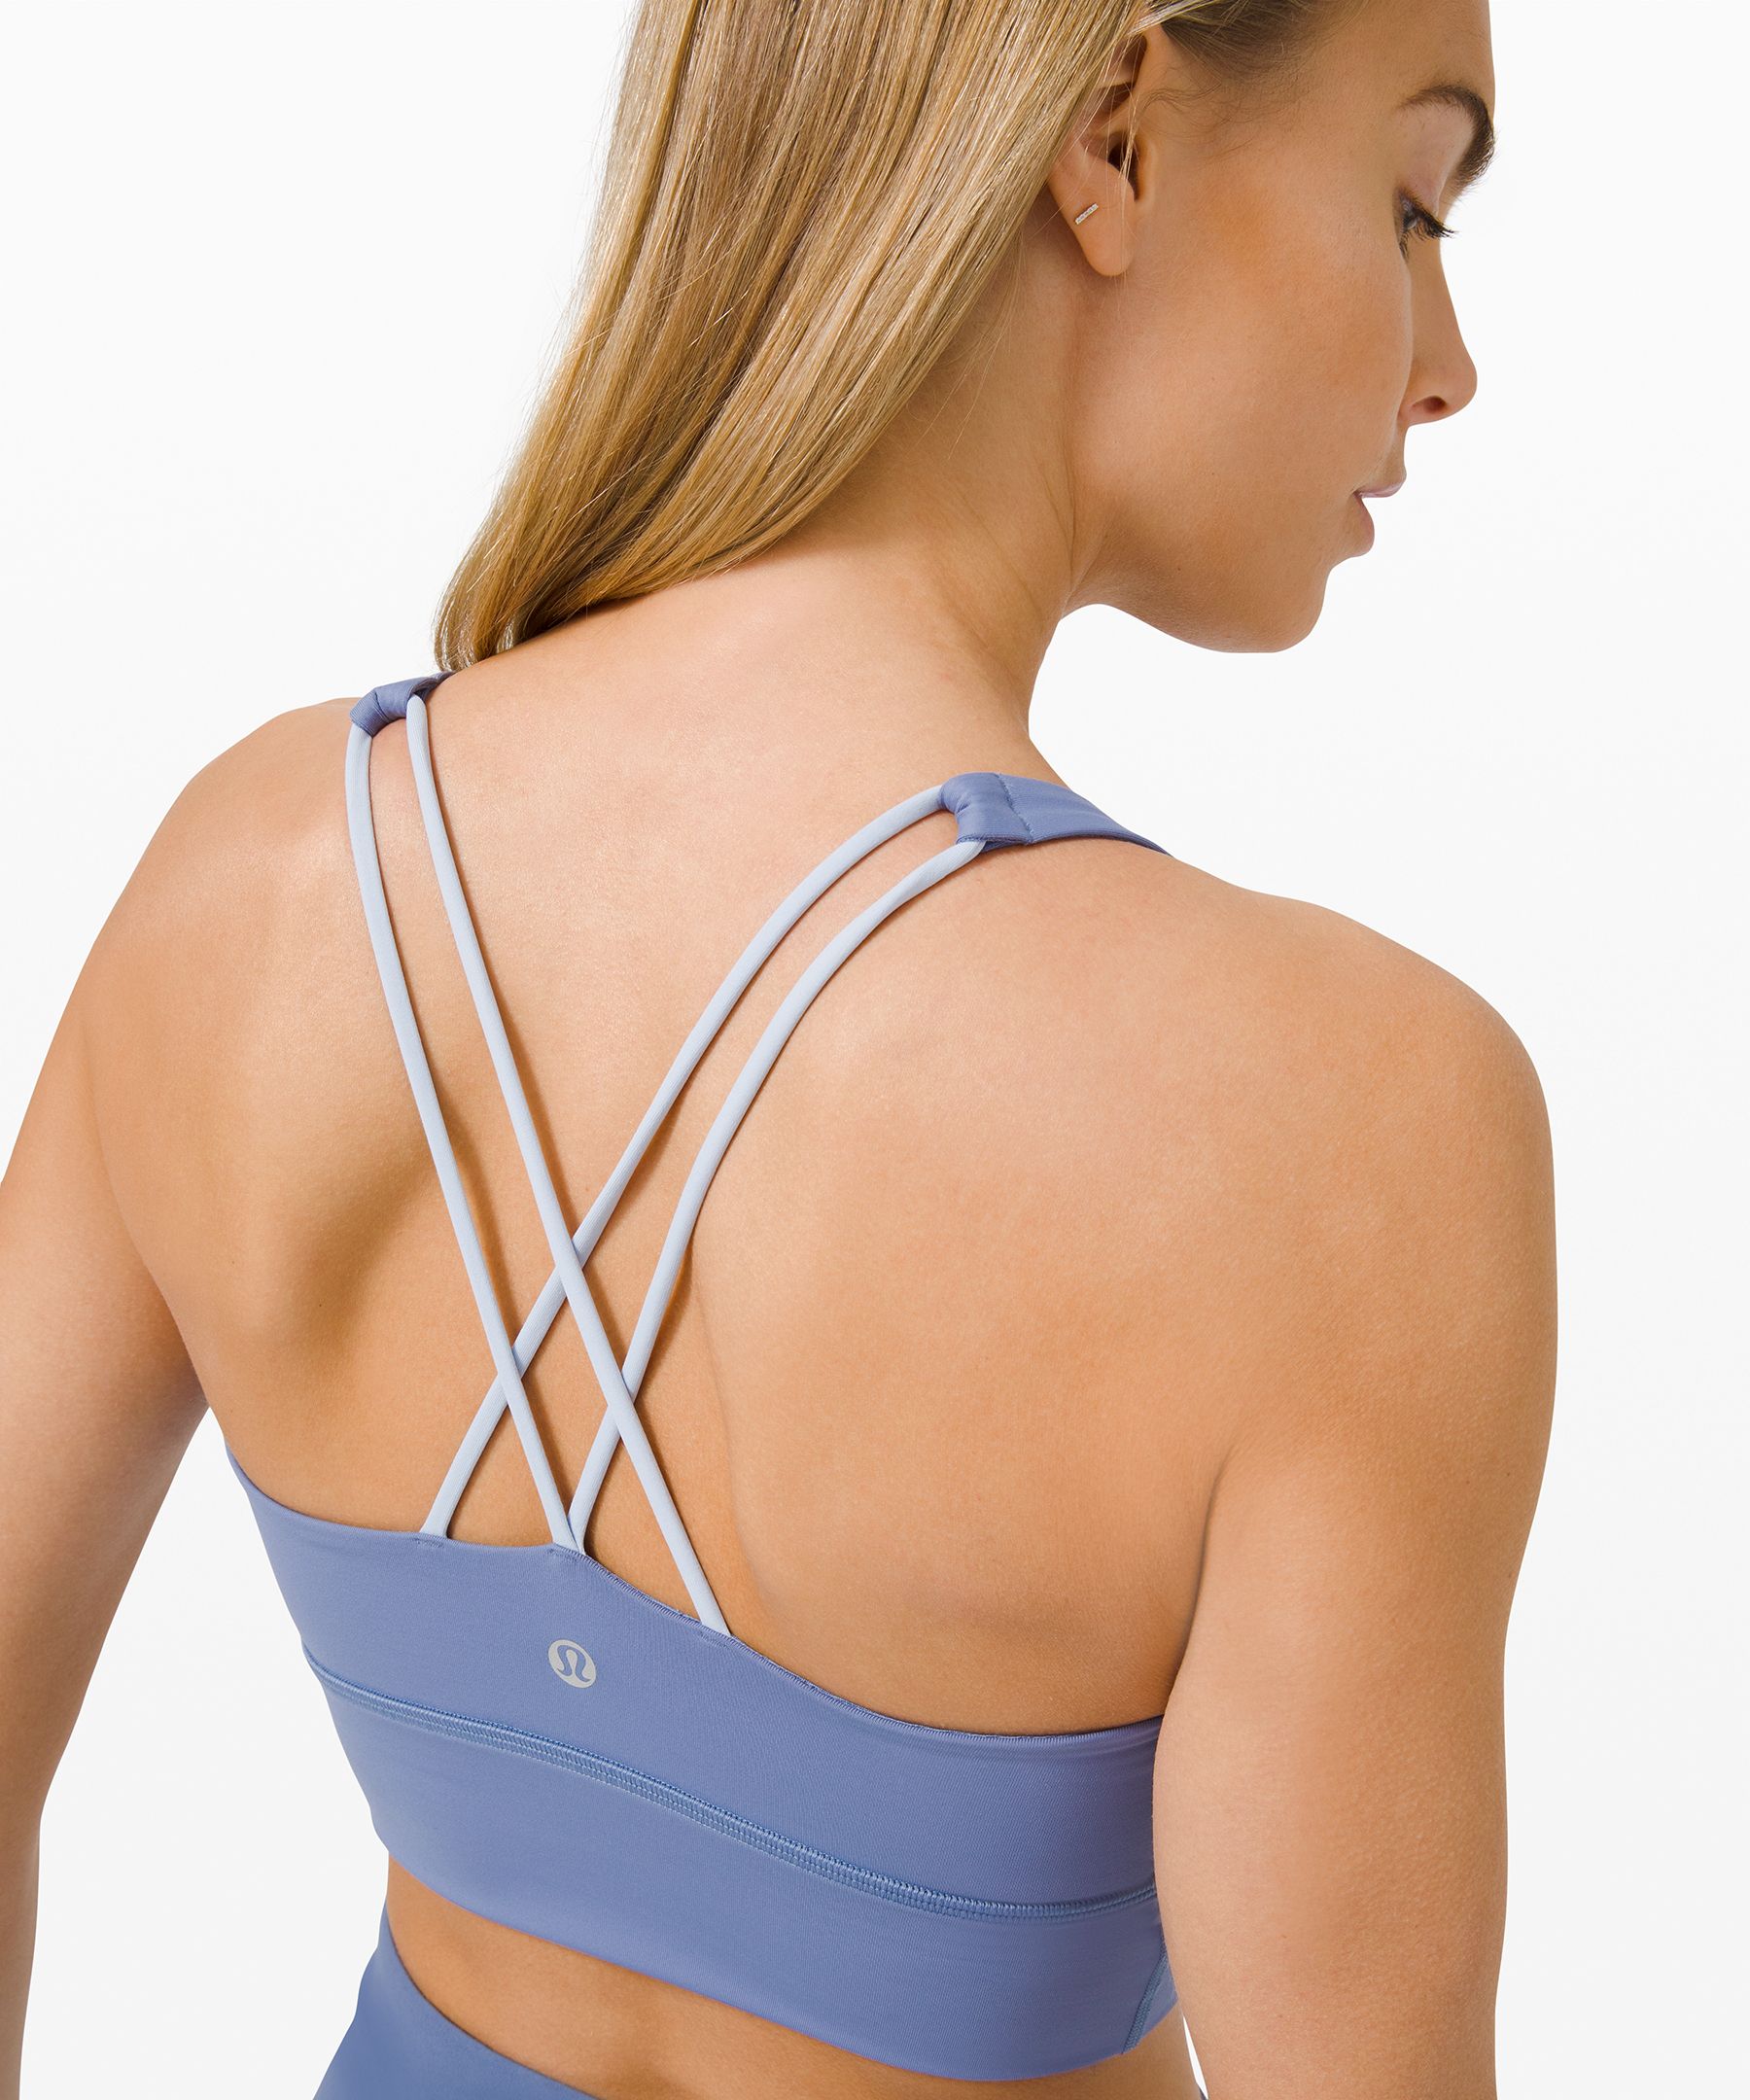 lululemon free to be bra review